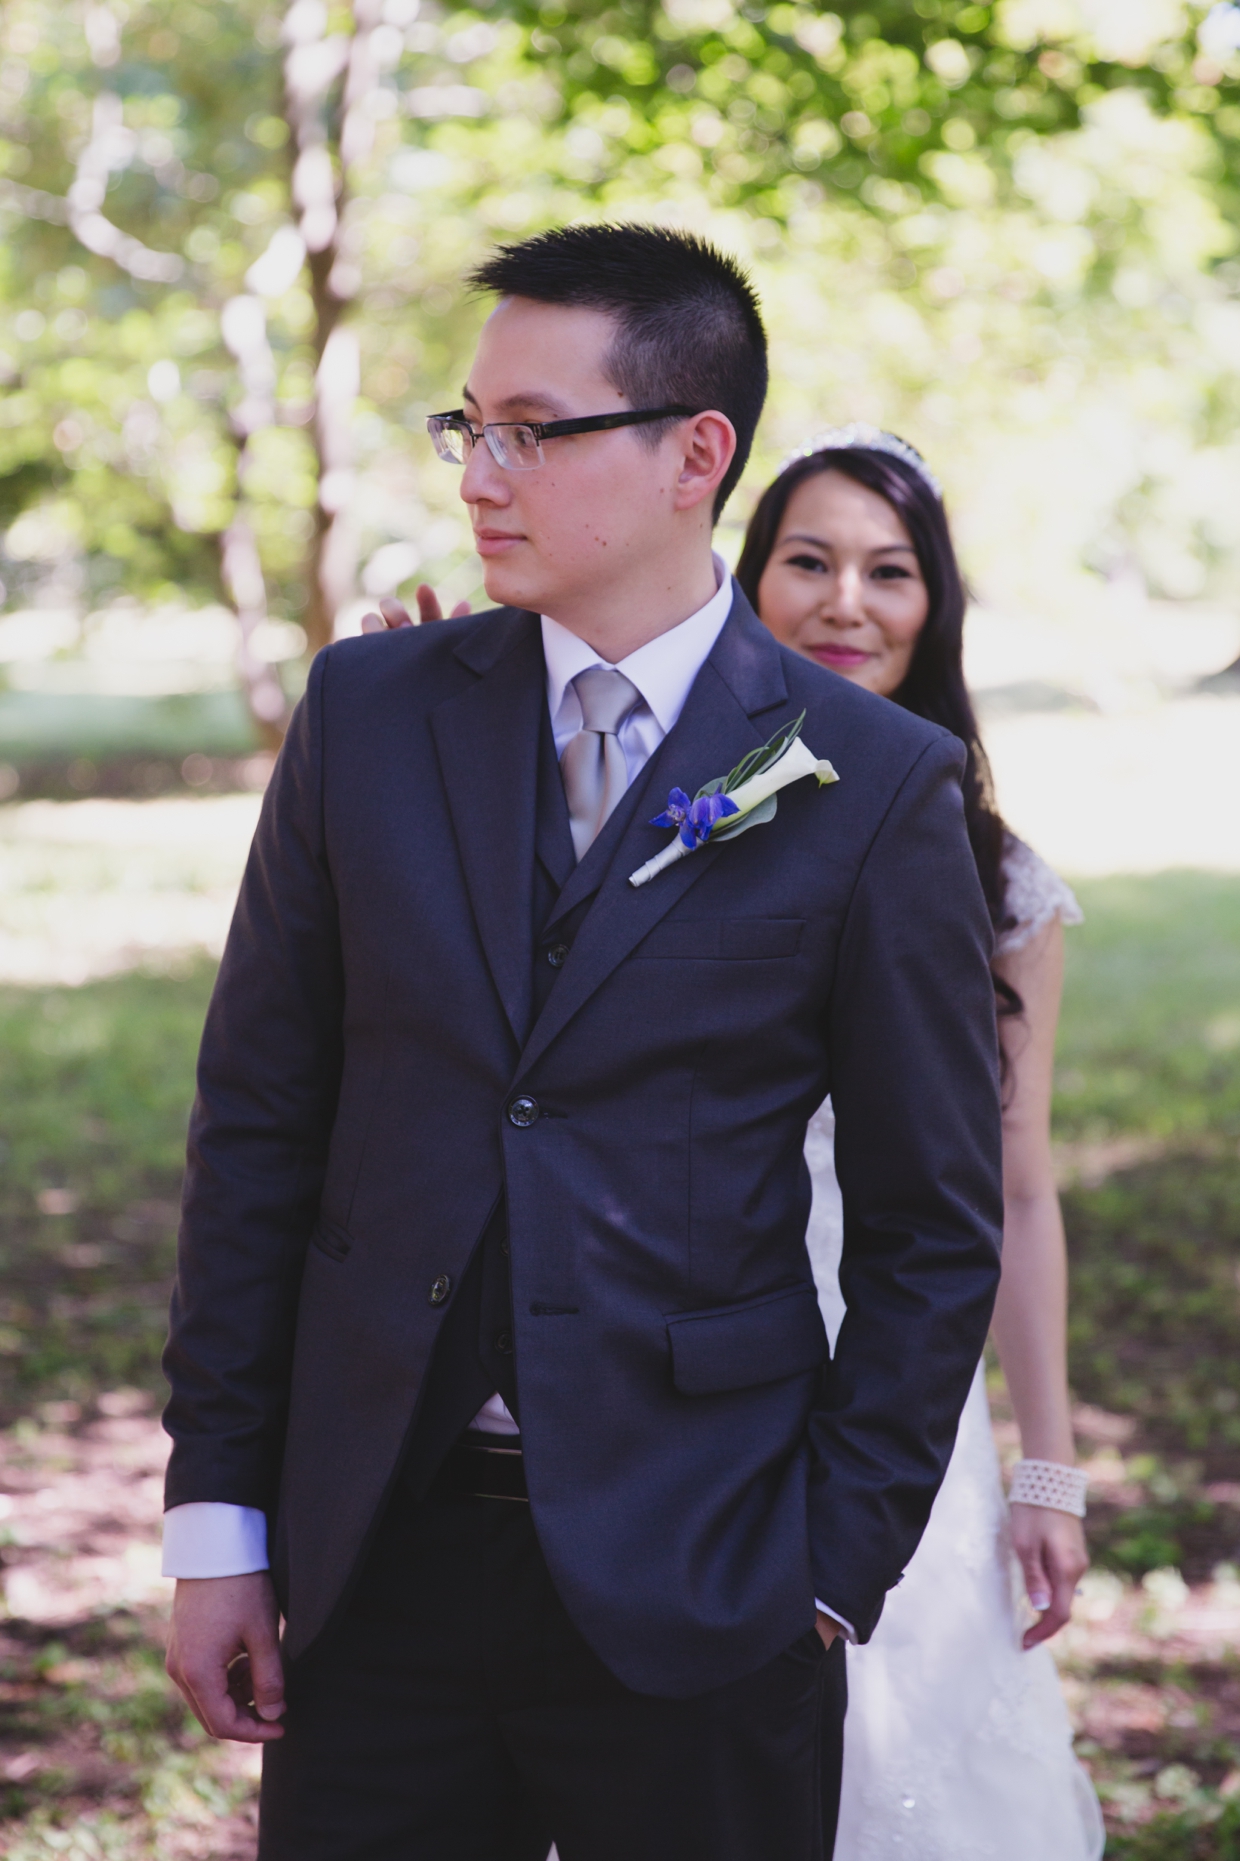 A bride taps the groom on the shoulder during their first look at the Arnold Arboretum